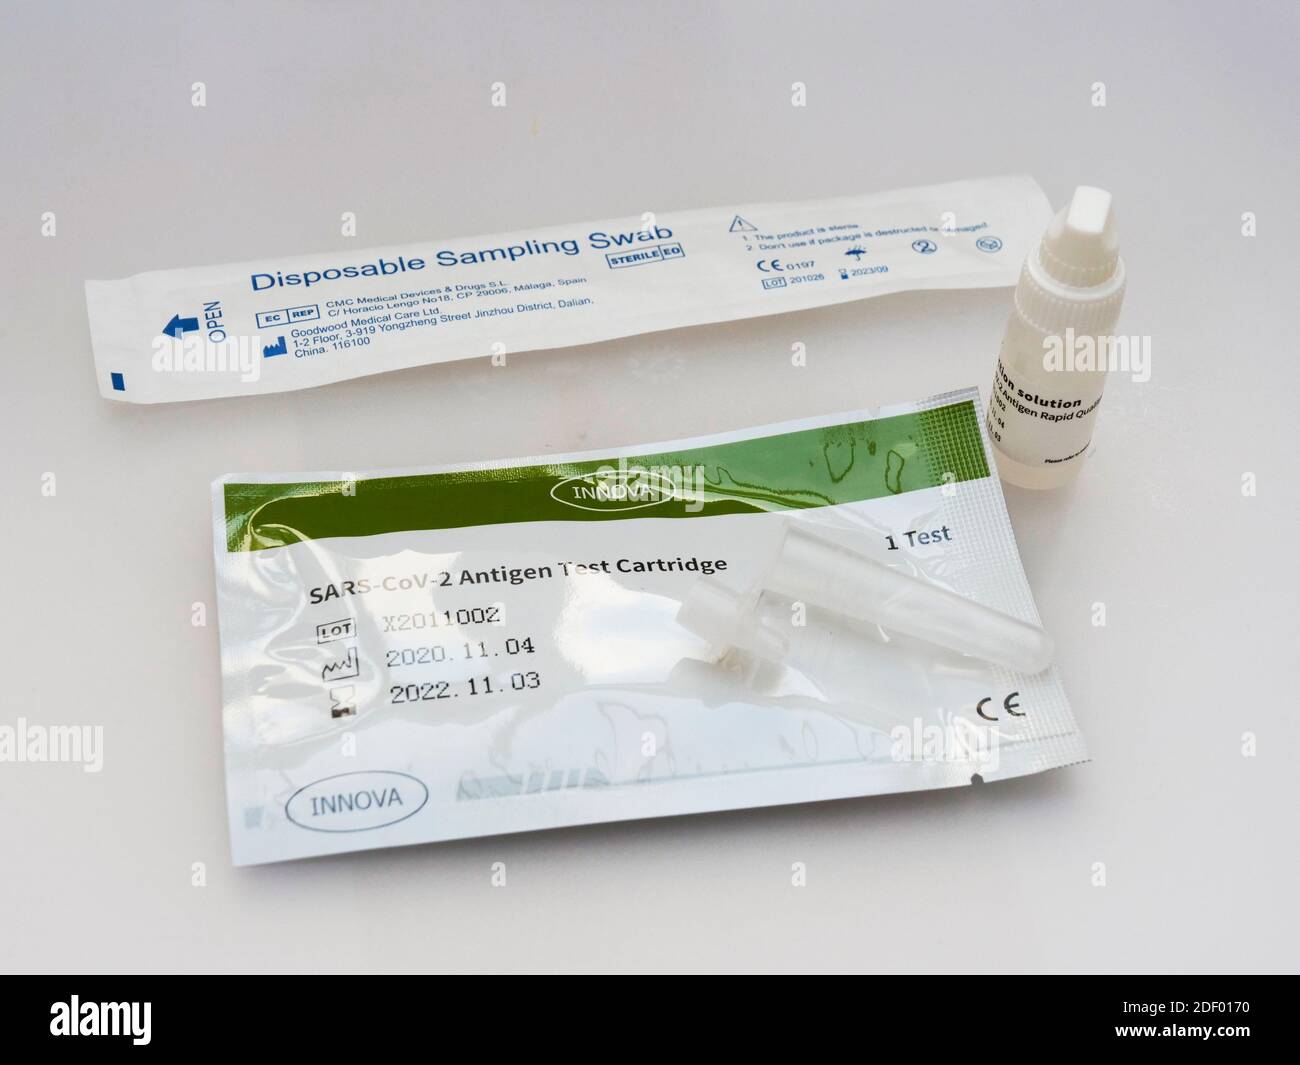 Innova brand Sars Cov 2 Antigen Rapid Qualitative Test Instant Covid 19 Coronavirus testing kit giving a result in 30 minutes issued to NHS staff to self test before going to work. Stock Photo